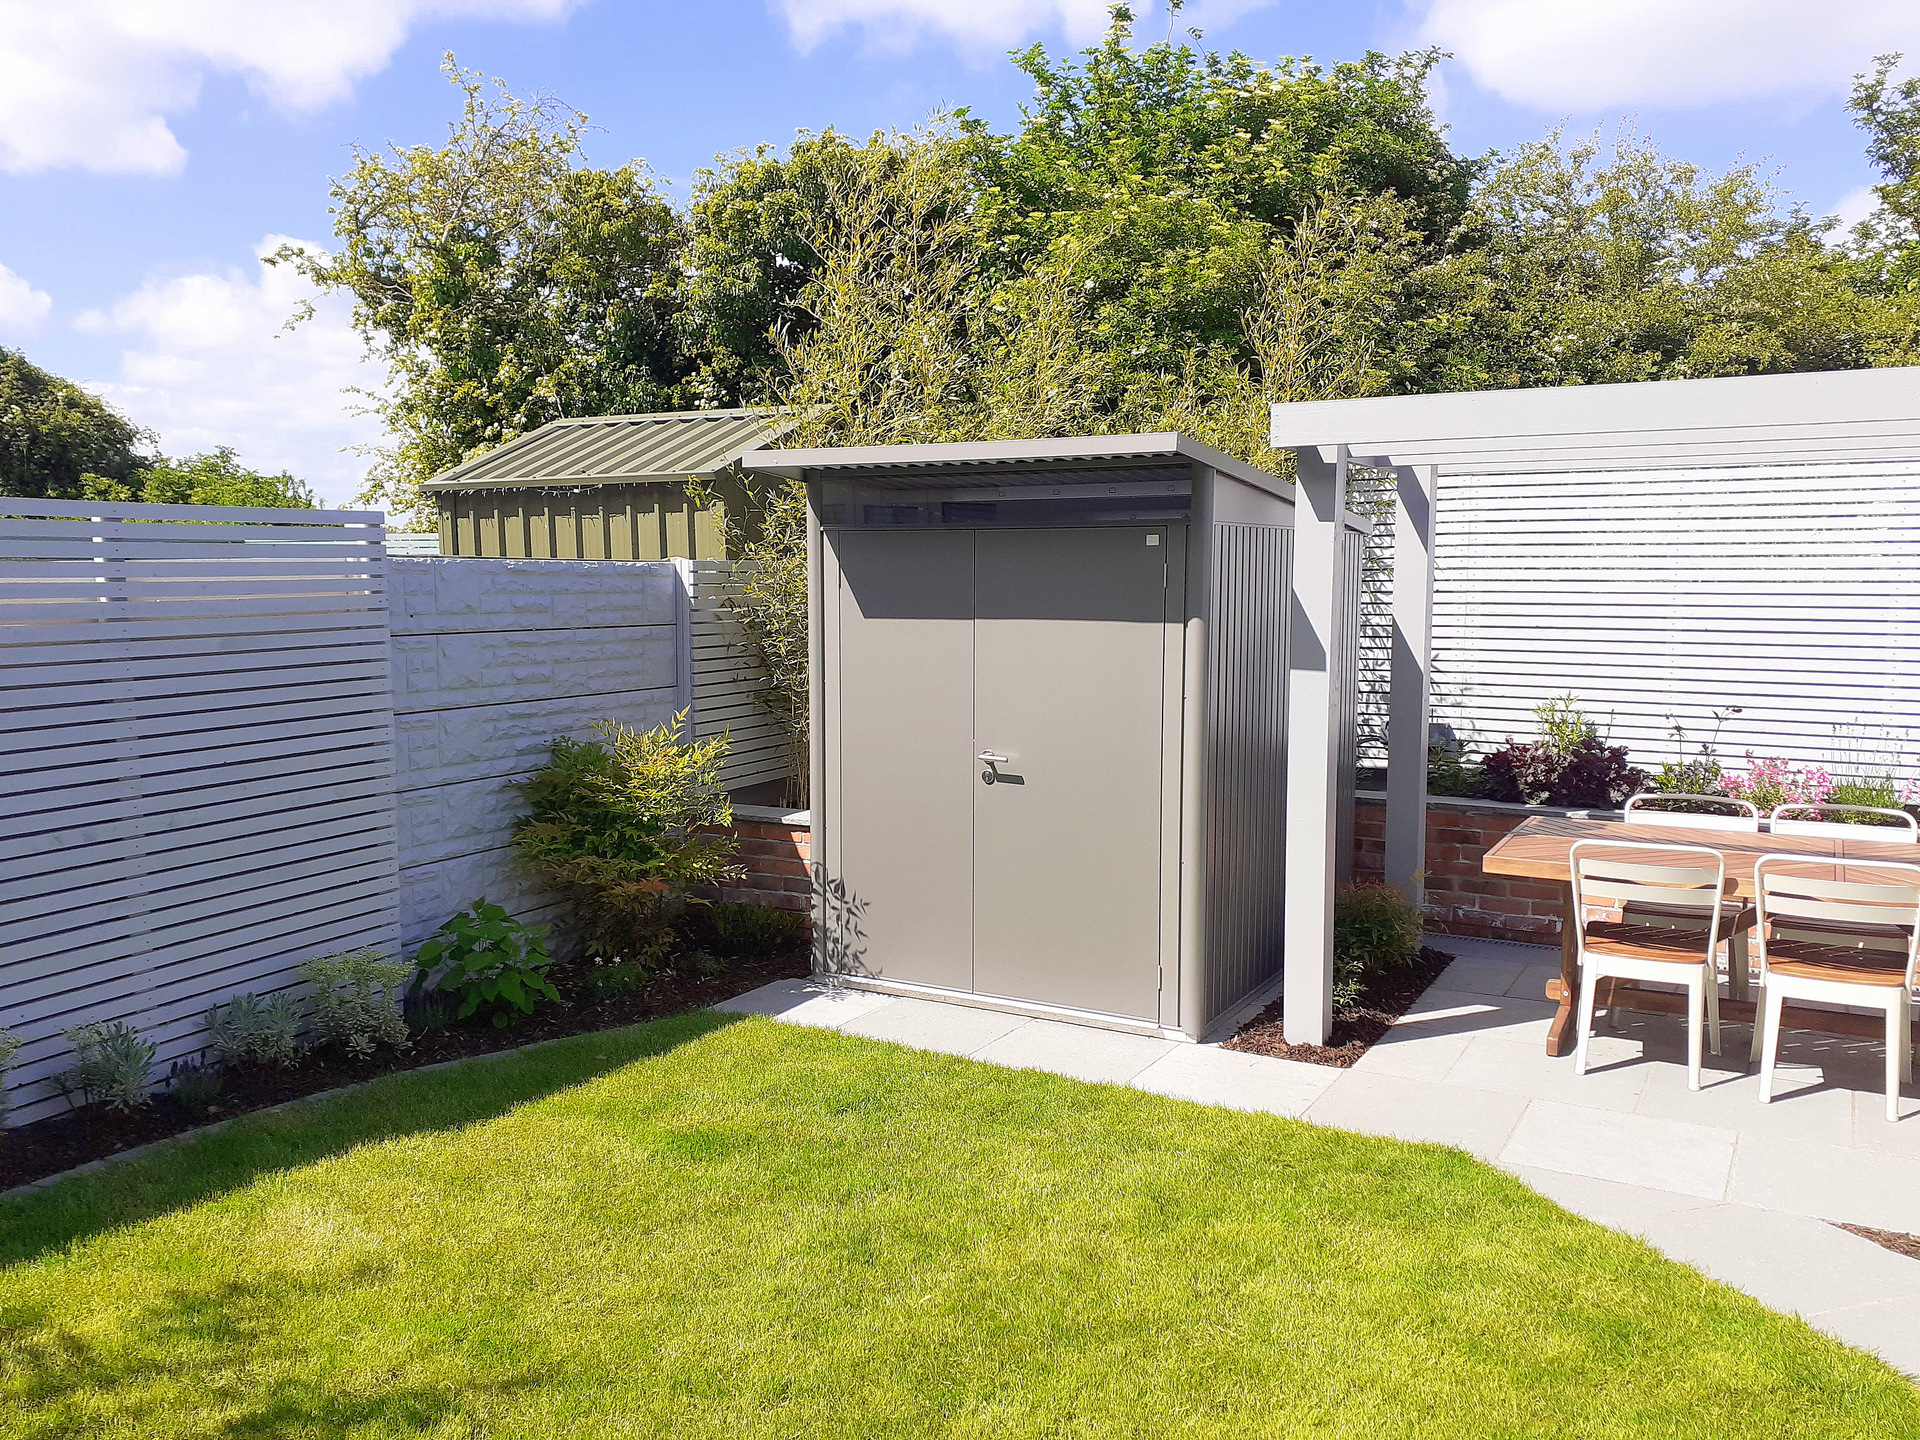 The Biohort AvantGarde Shed looking stunning in this beautiful new garden in Asbourne.